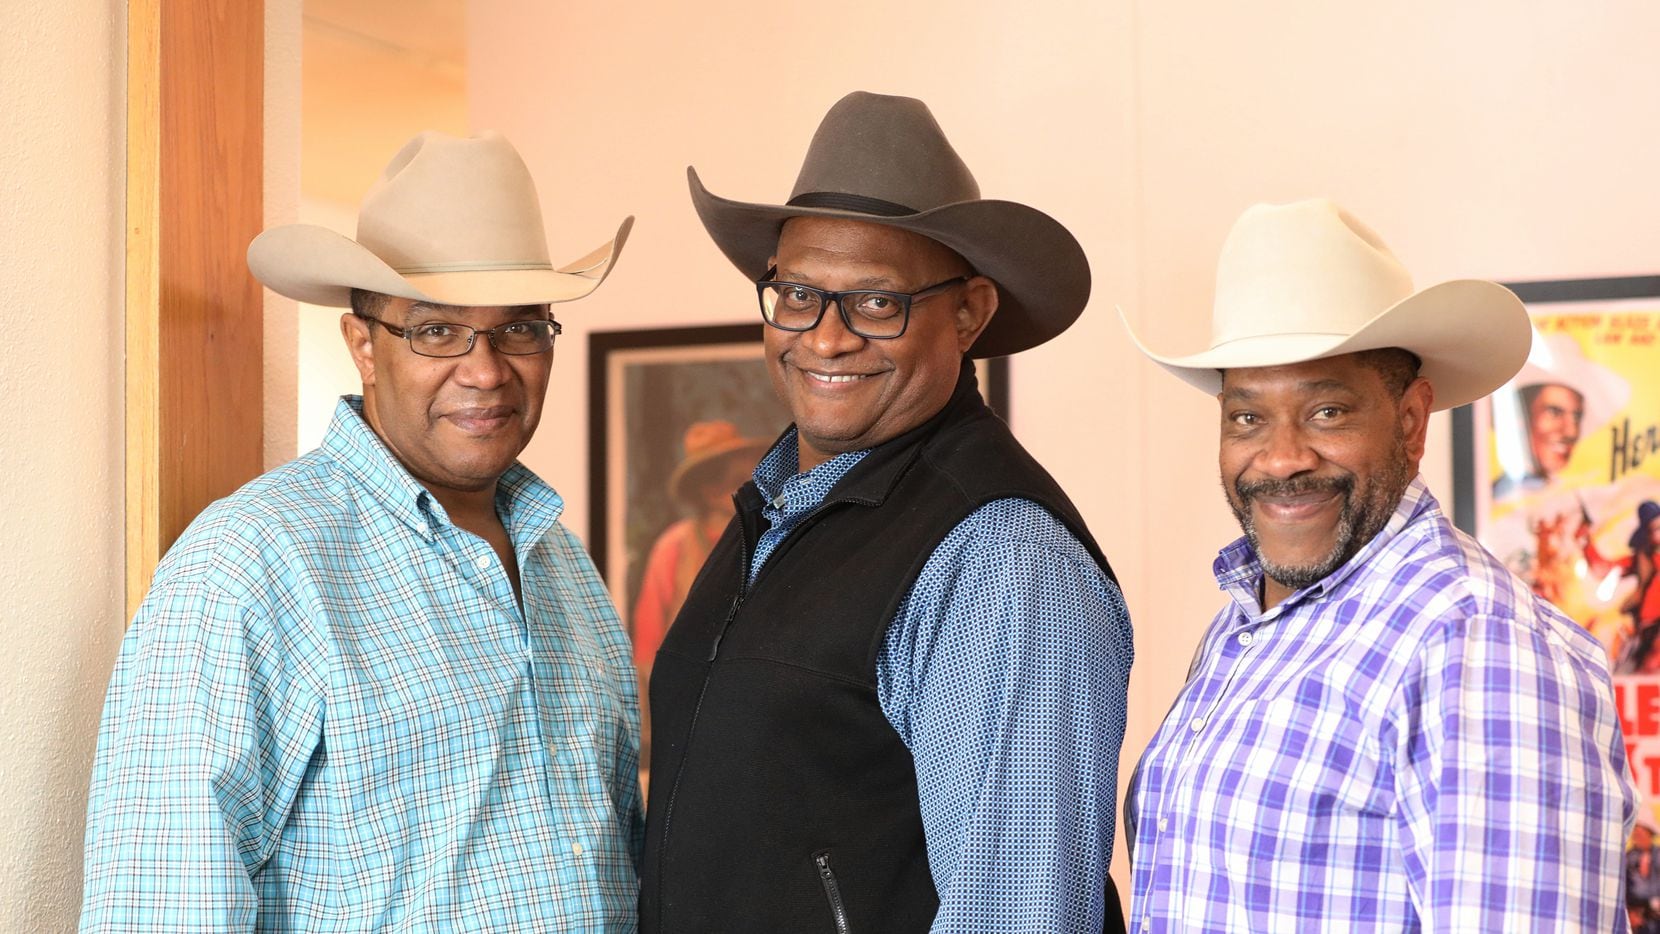 From left, Robby Hearn, Harlan Hearn and Wendell Hearn, sons of rodeo Hall of Famer Cleo Hearn.